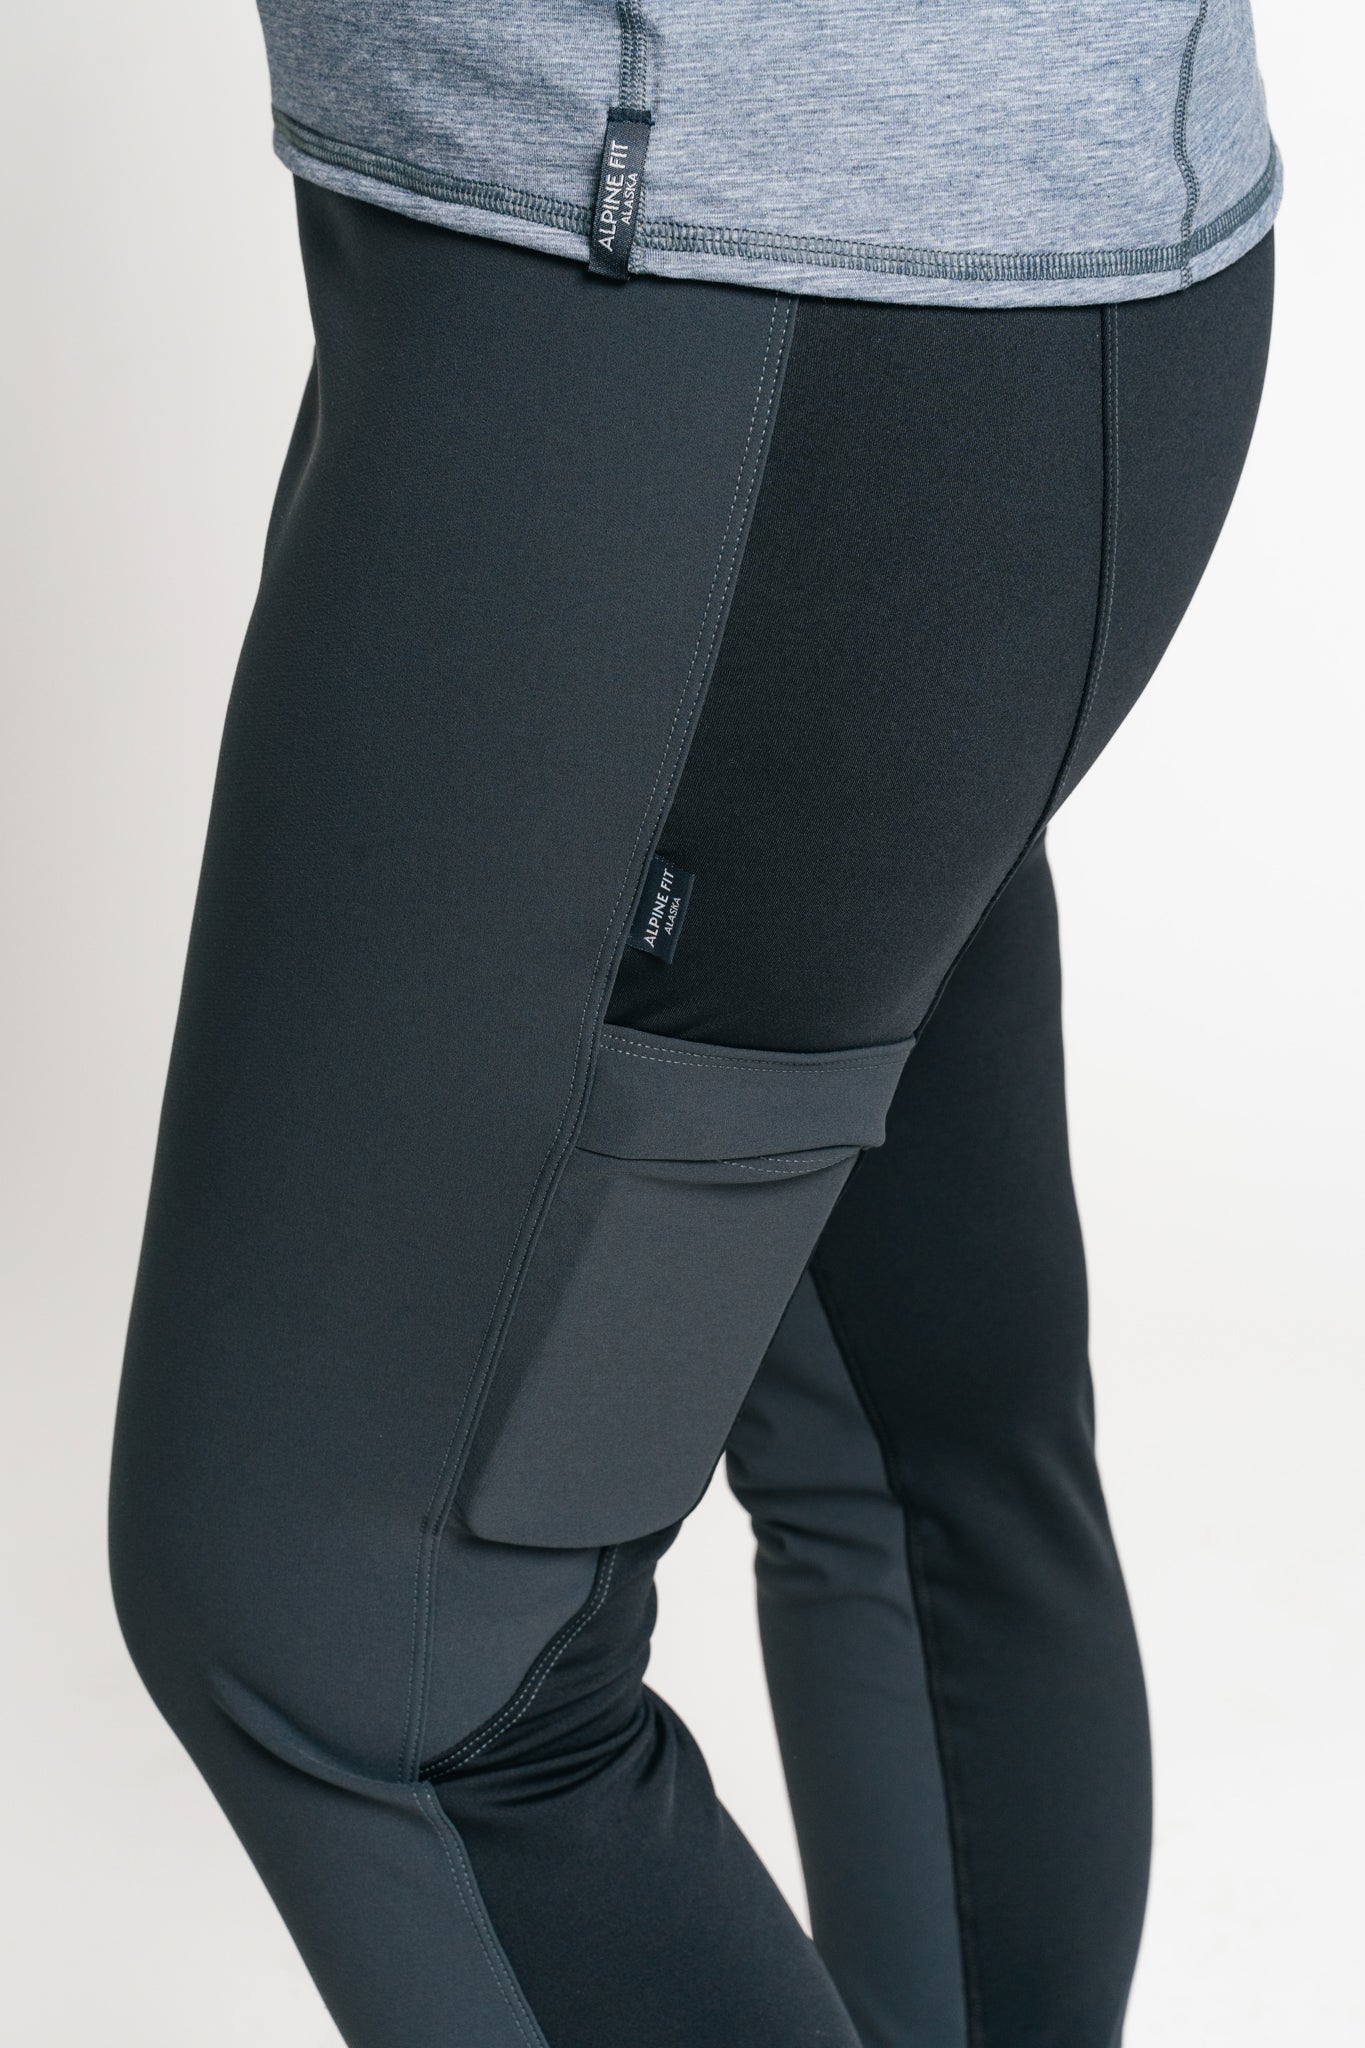 alpine fit hiking leggings on model showing thigh